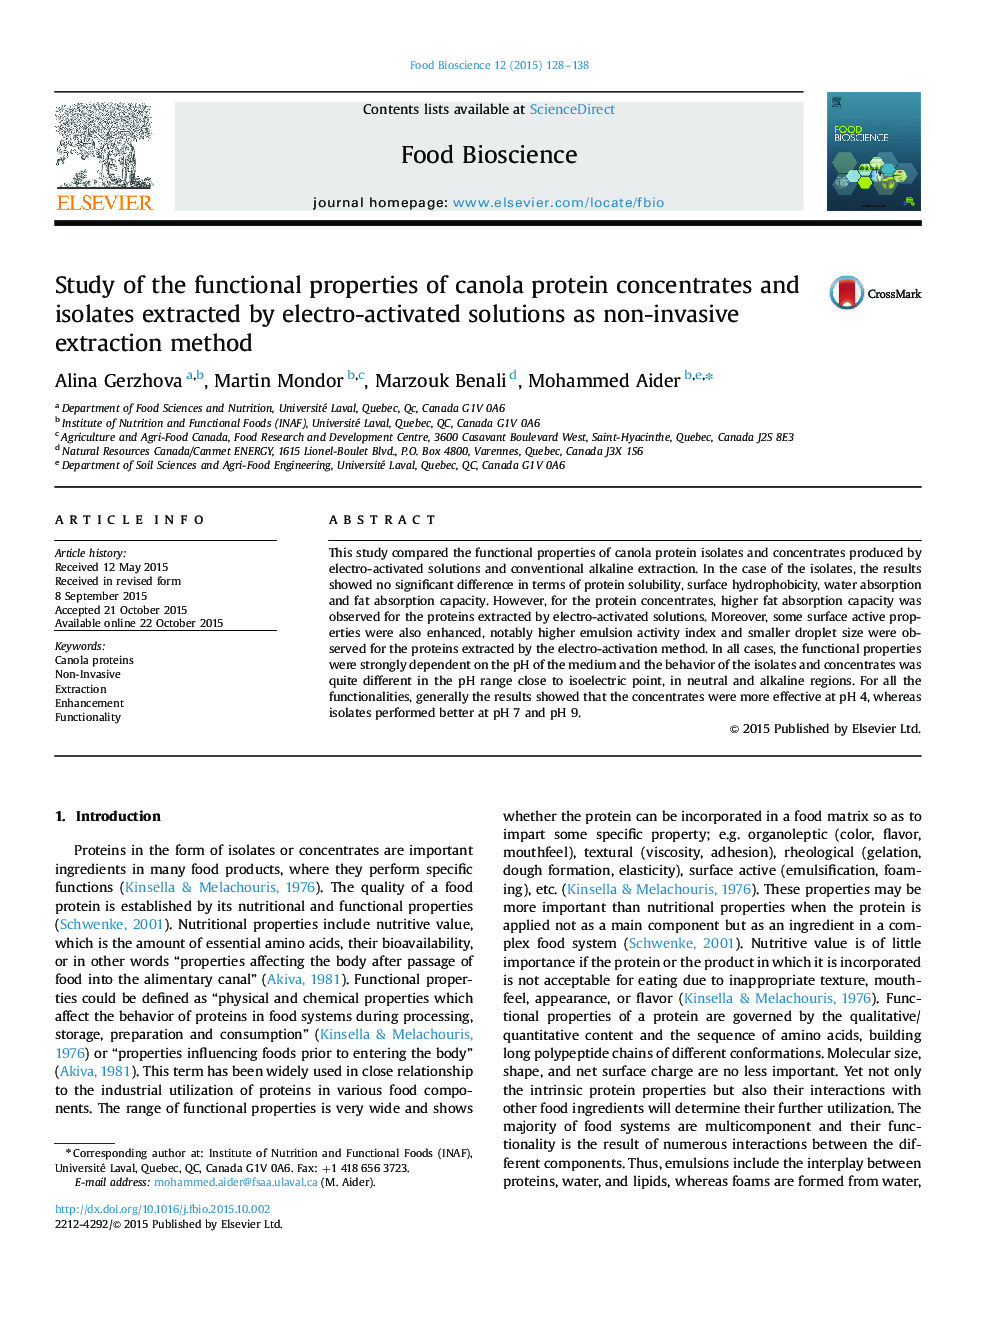 Study of the functional properties of canola protein concentrates and isolates extracted by electro-activated solutions as non-invasive extraction method